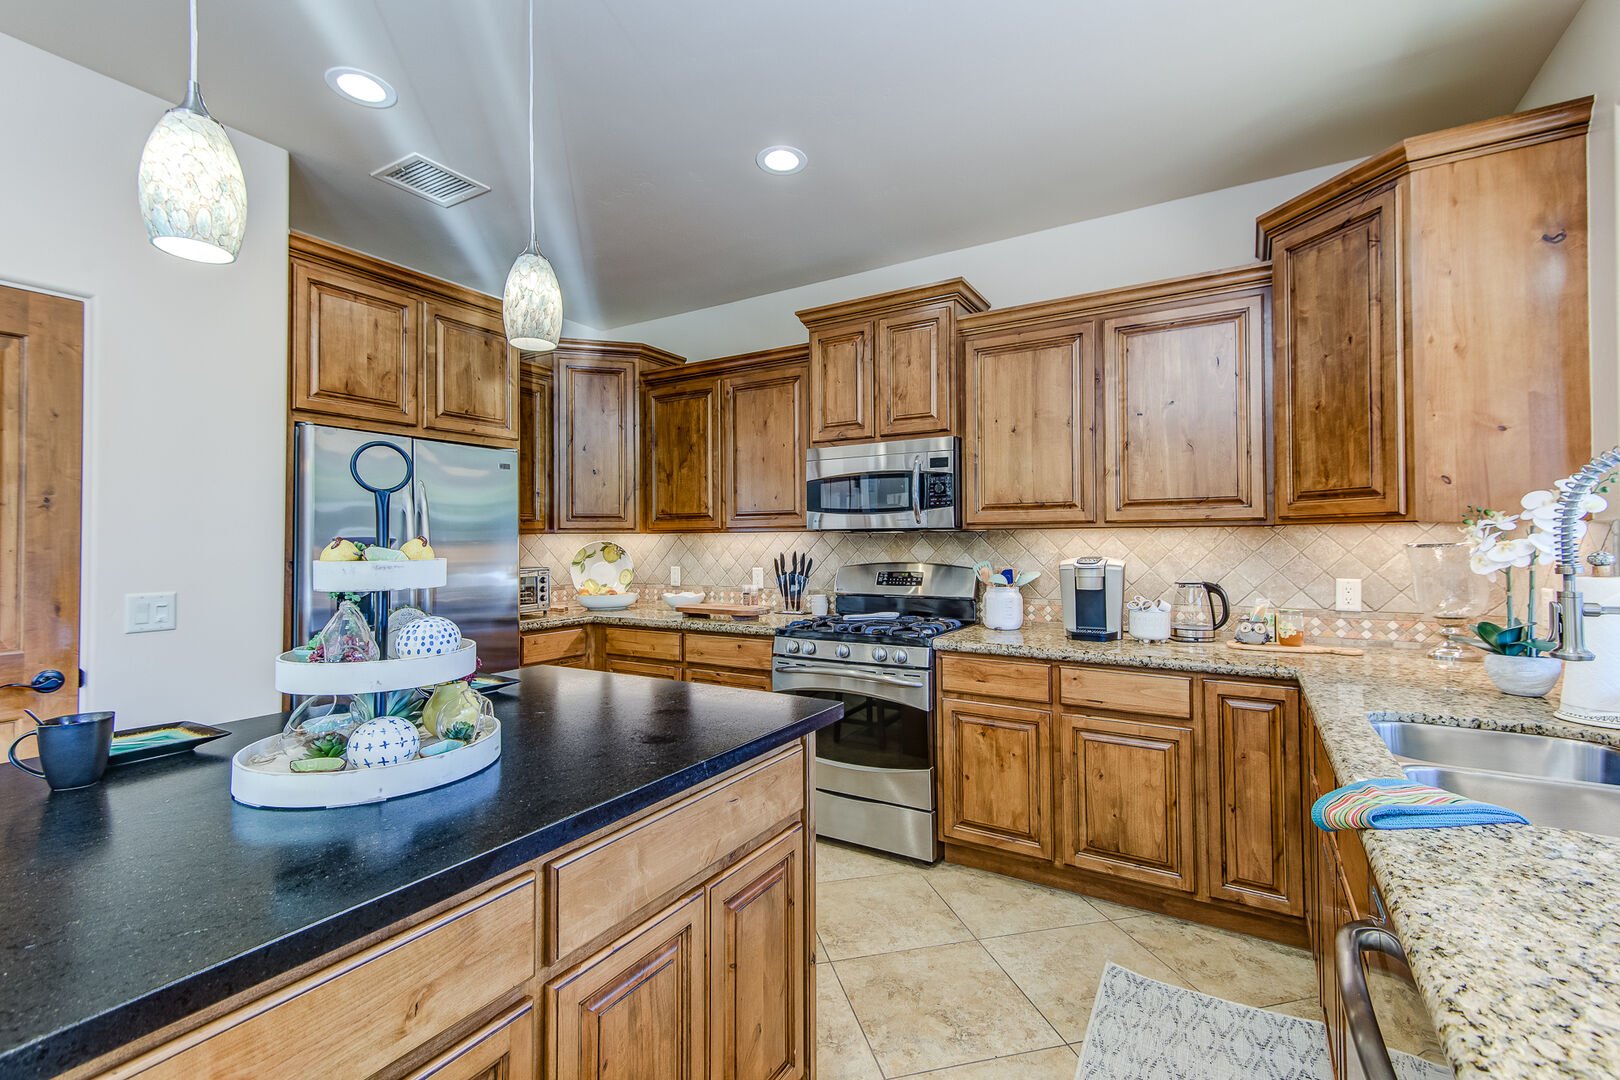 Spacious and Fully Equipped Kitchen Featuring Alder Wood Cabinets and Granite Counters